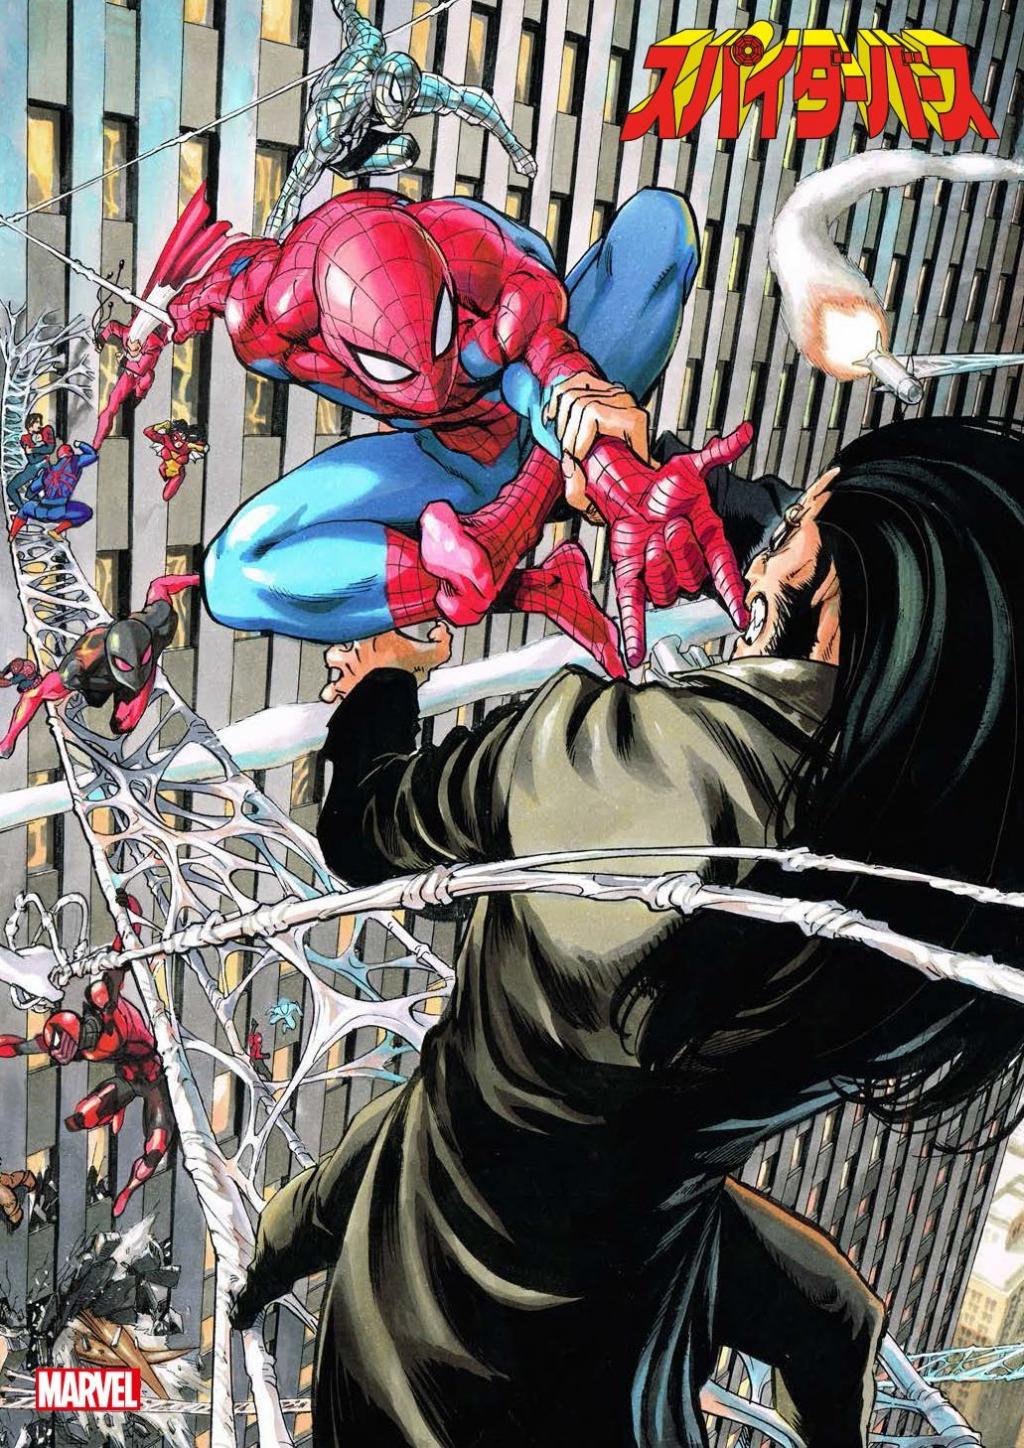 armored_spider_man_brix_daemos_spider_man_and_spider_woman_spider_man_series_and_etc_drawn_by_murata_yuusuke_0d6c8b2fb208d2.jpg